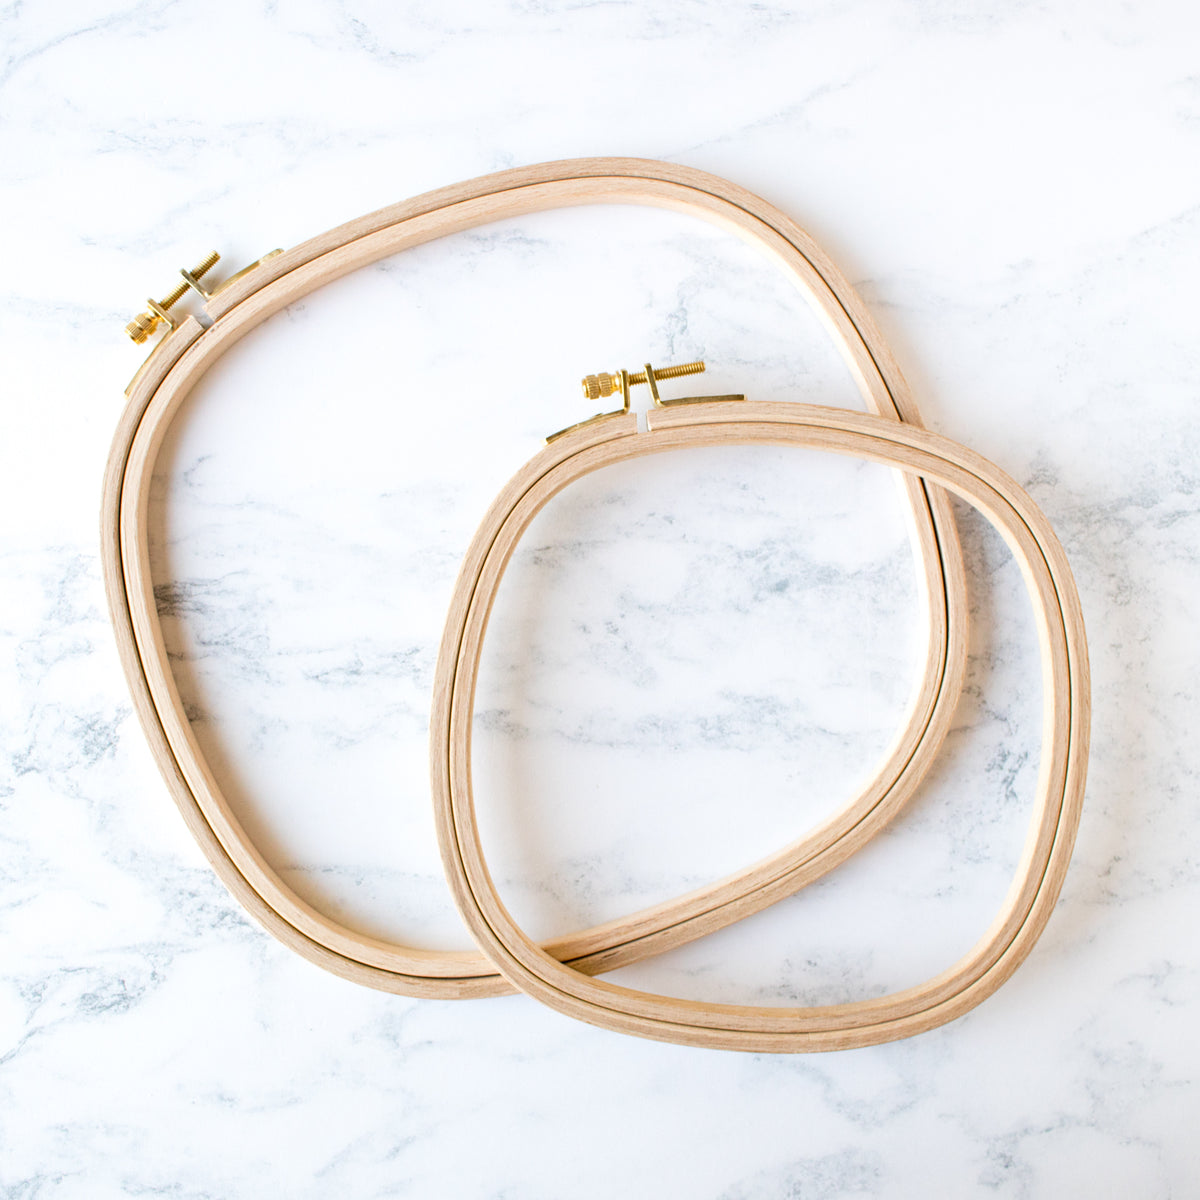 Premium Hard Wood Embroidery Hoops - Square